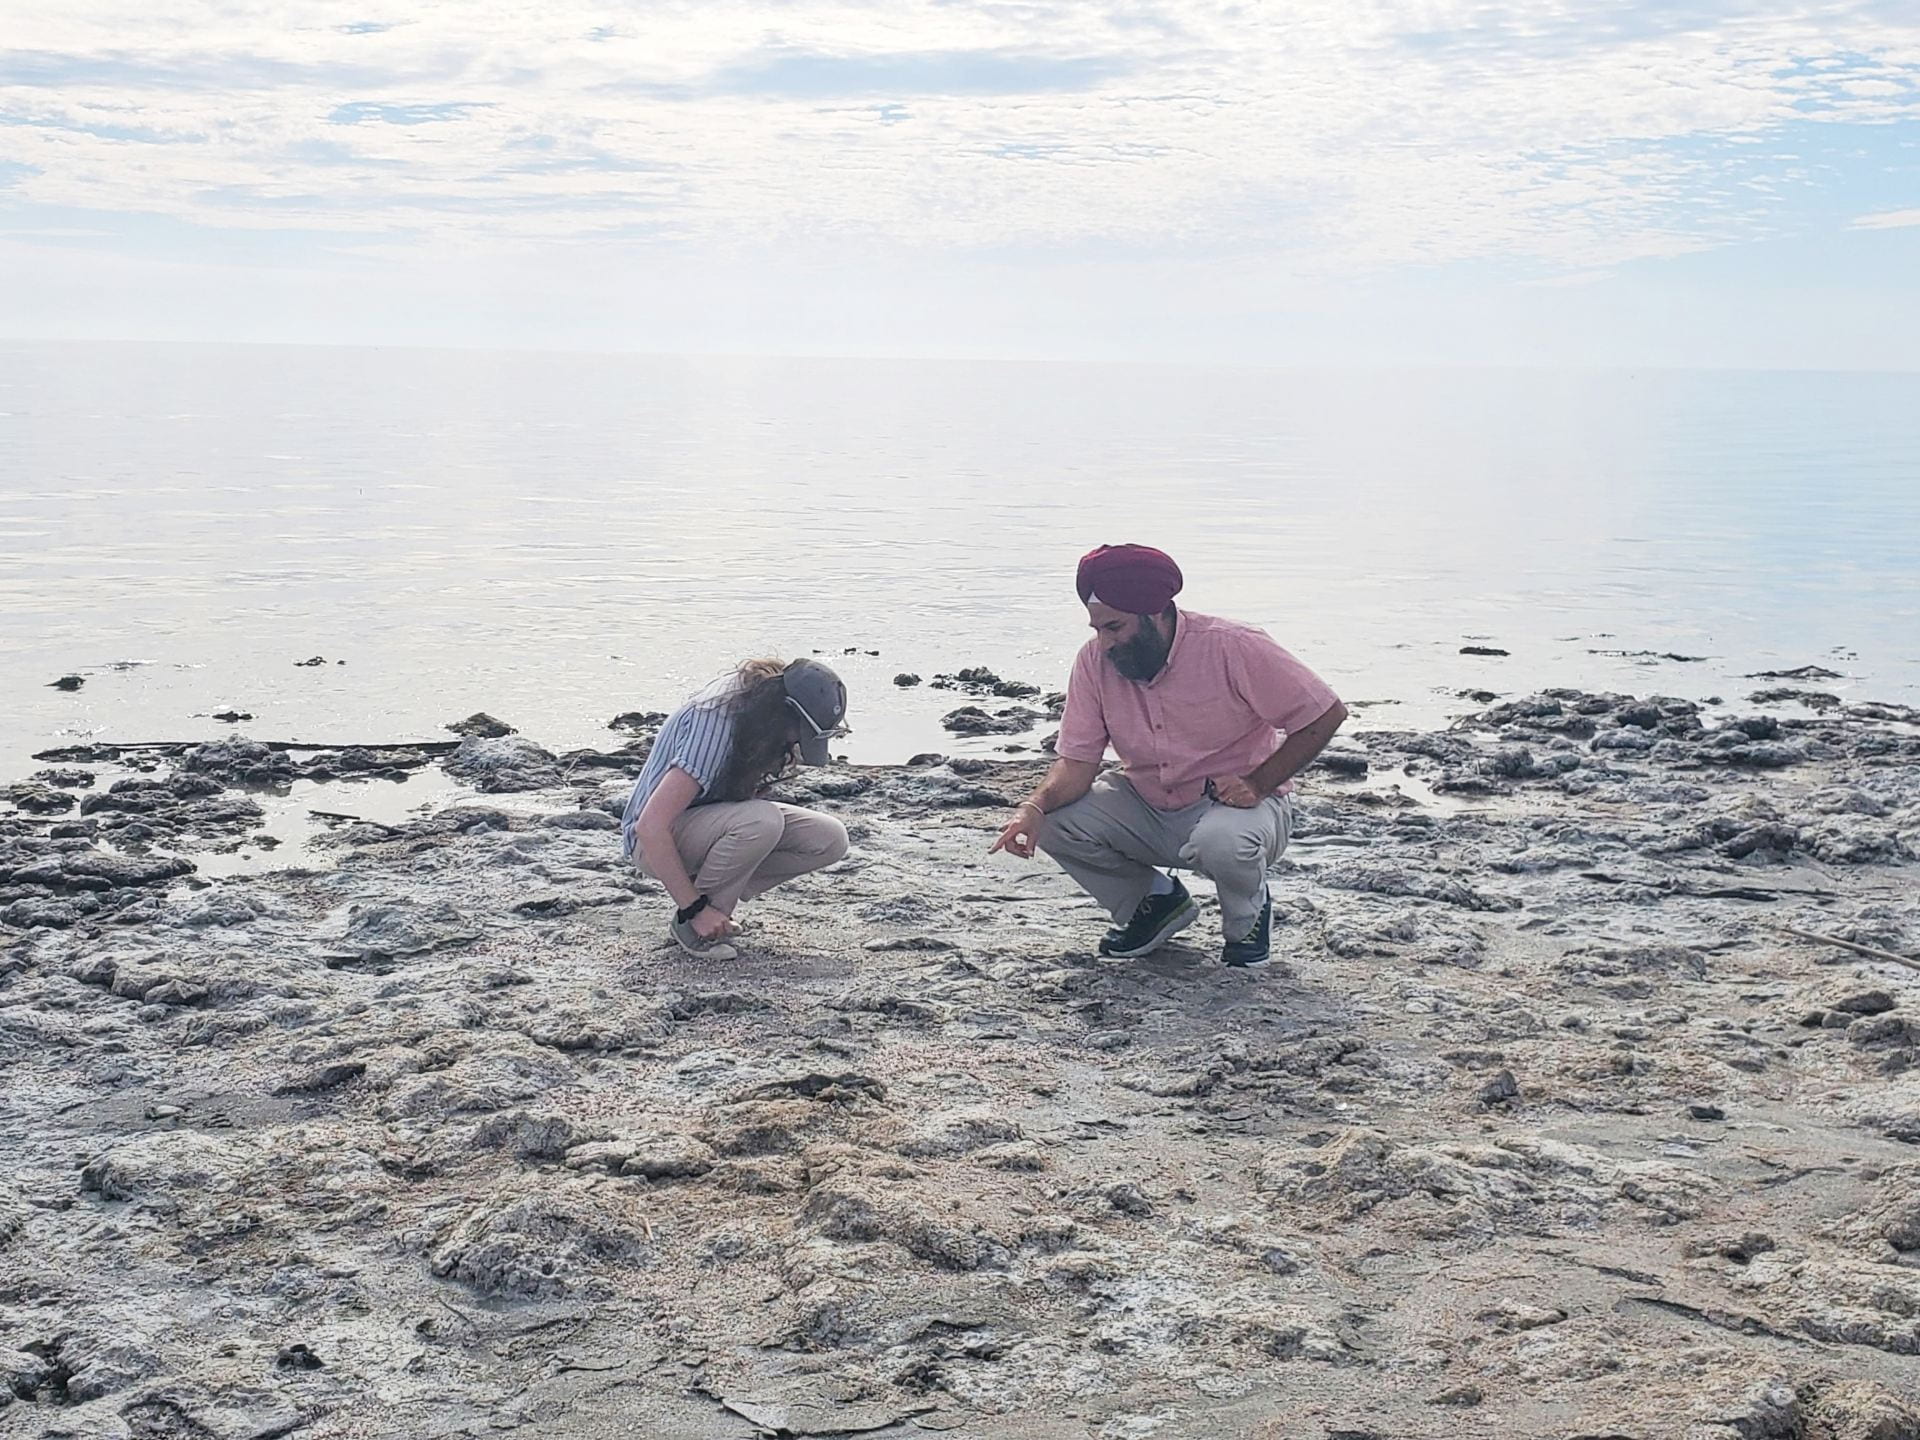 Two people examining a dried sea bed while discussing what they see.